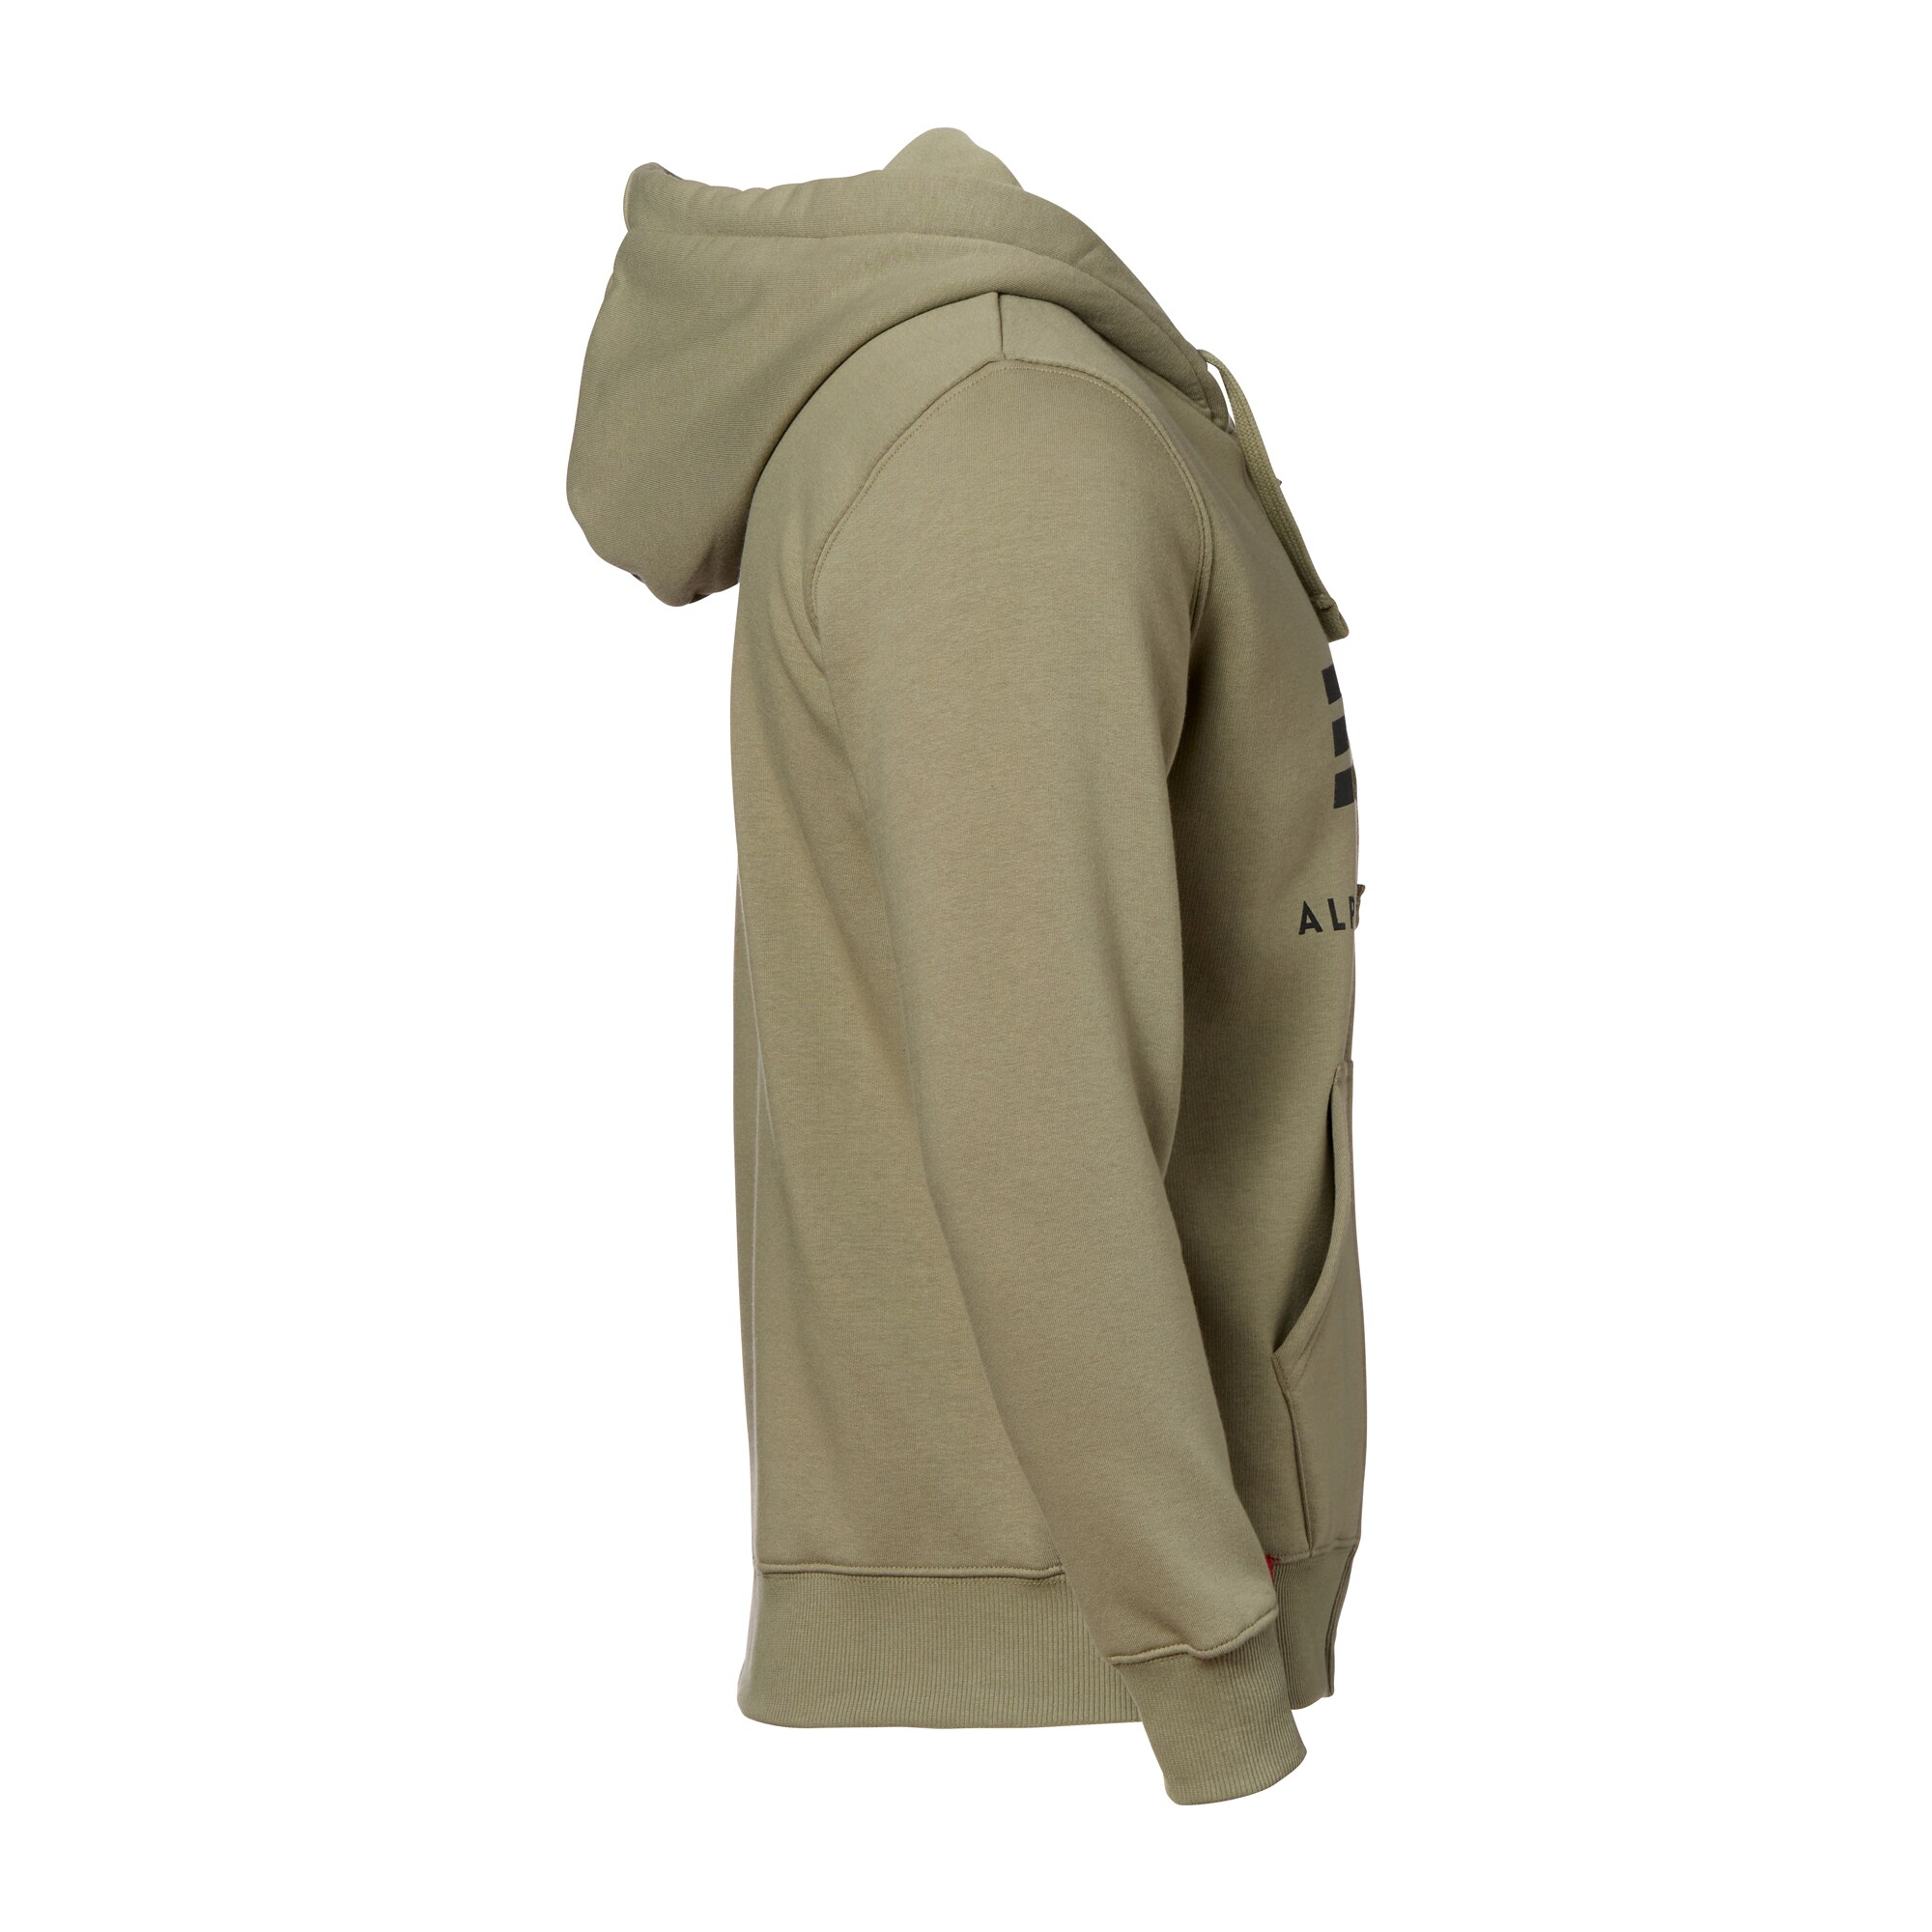 Purchase the Alpha Industries ASMC Basic olive by Zip Hoodie